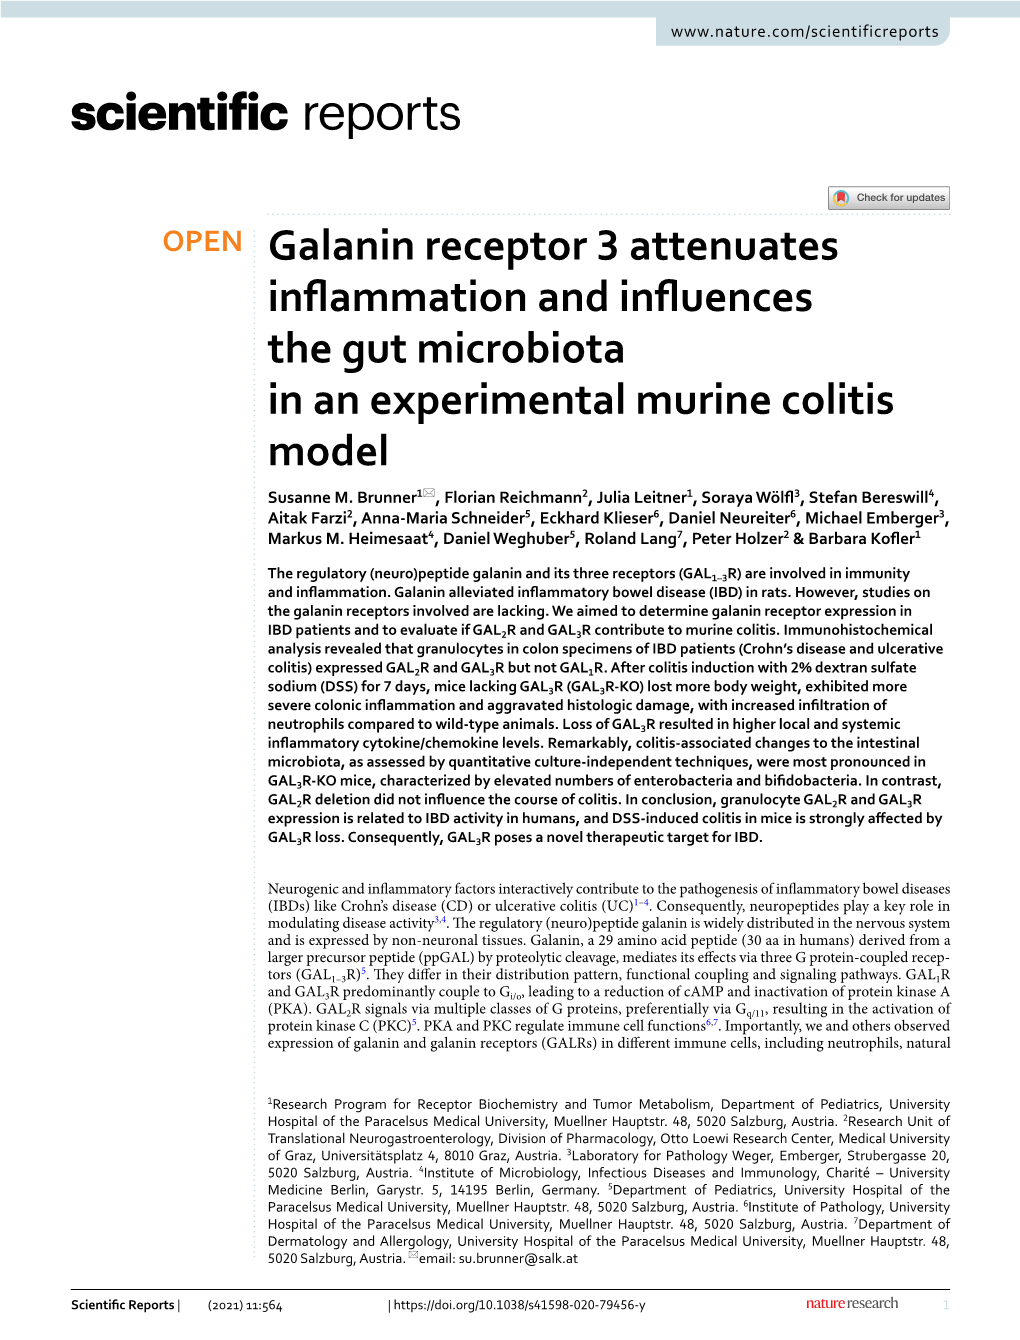 Galanin Receptor 3 Attenuates Inflammation and Influences the Gut